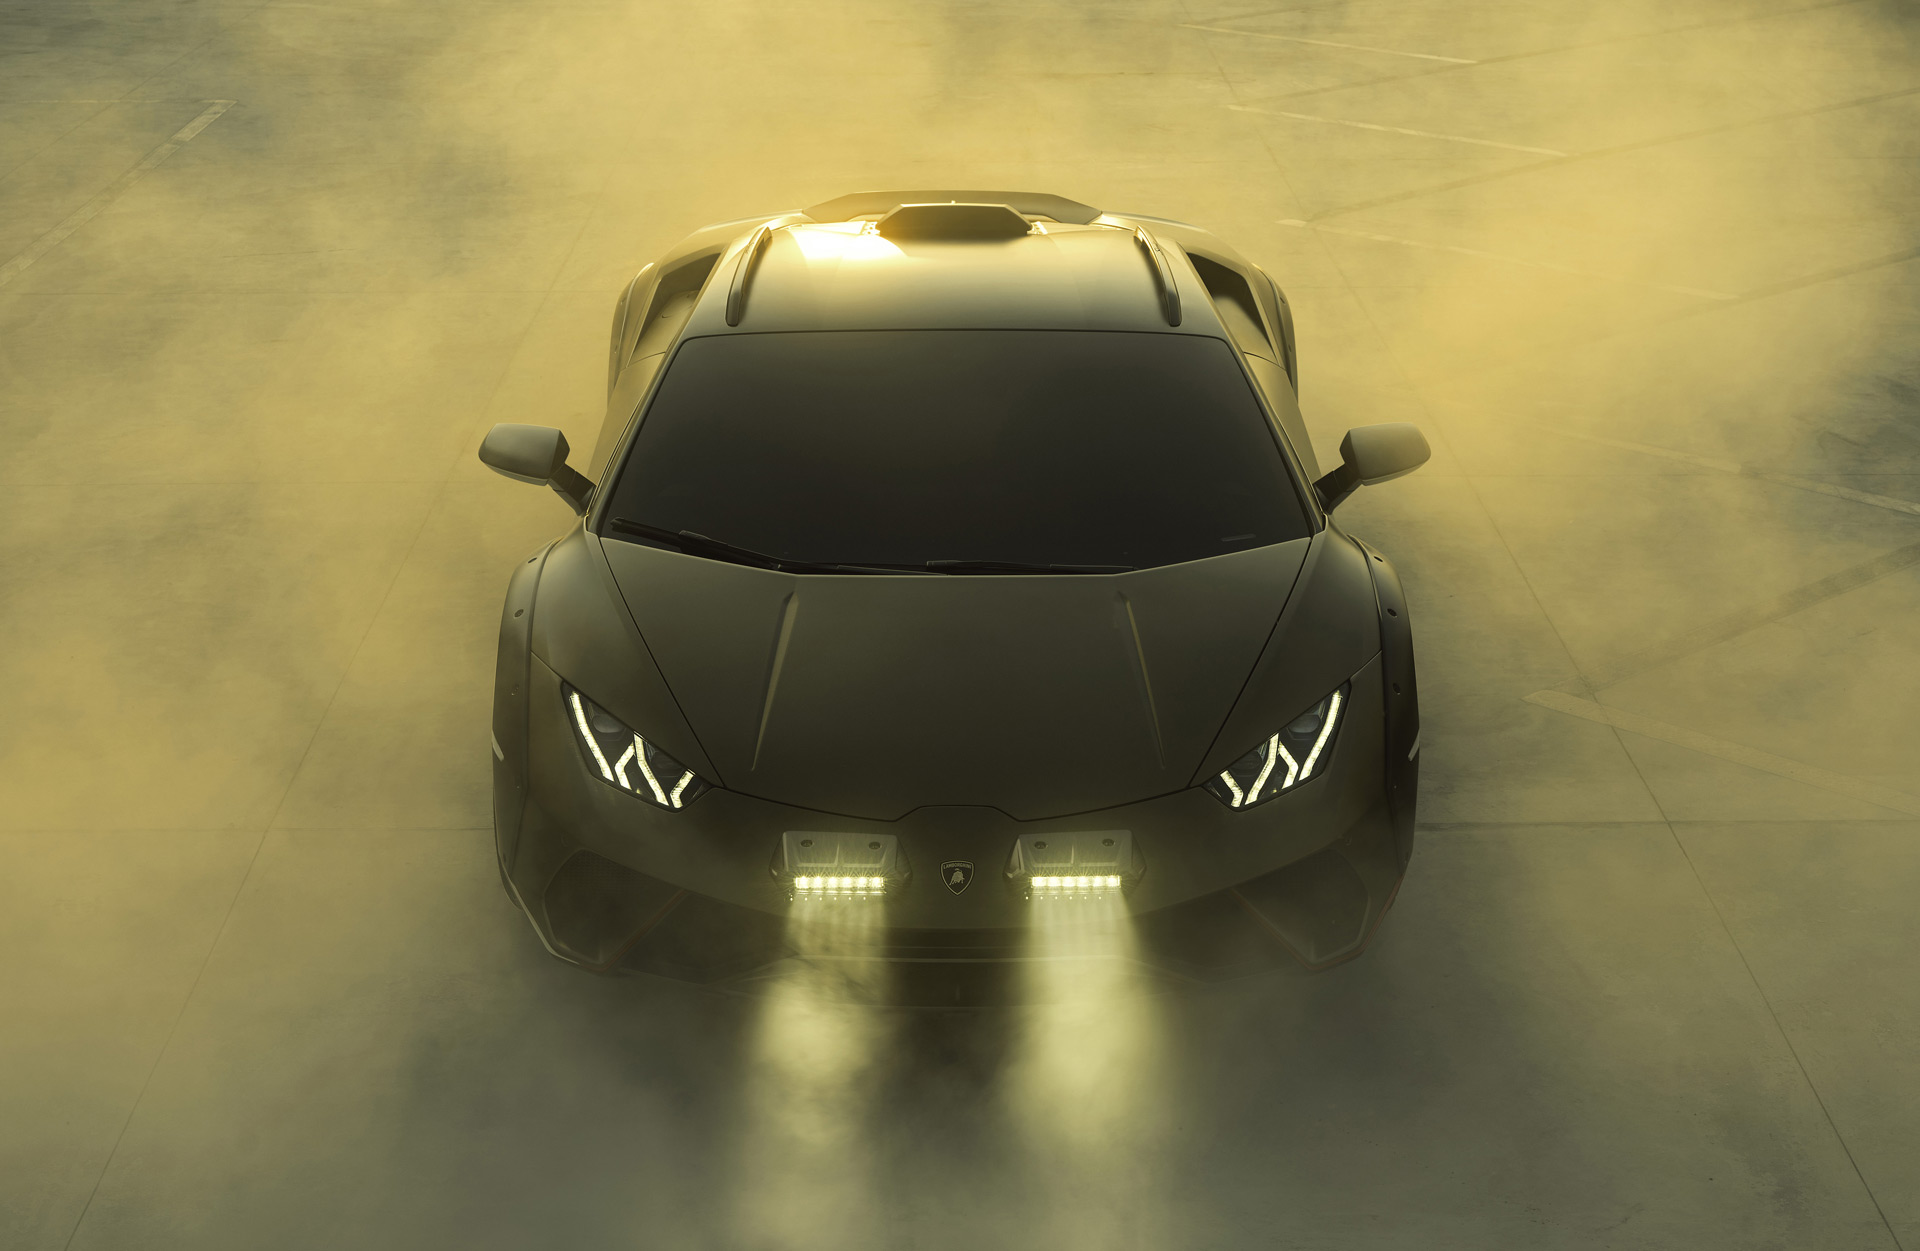 Lamborghini Huracán Sterrato is new off-road supercar |  ConchoValleyHomepage.com